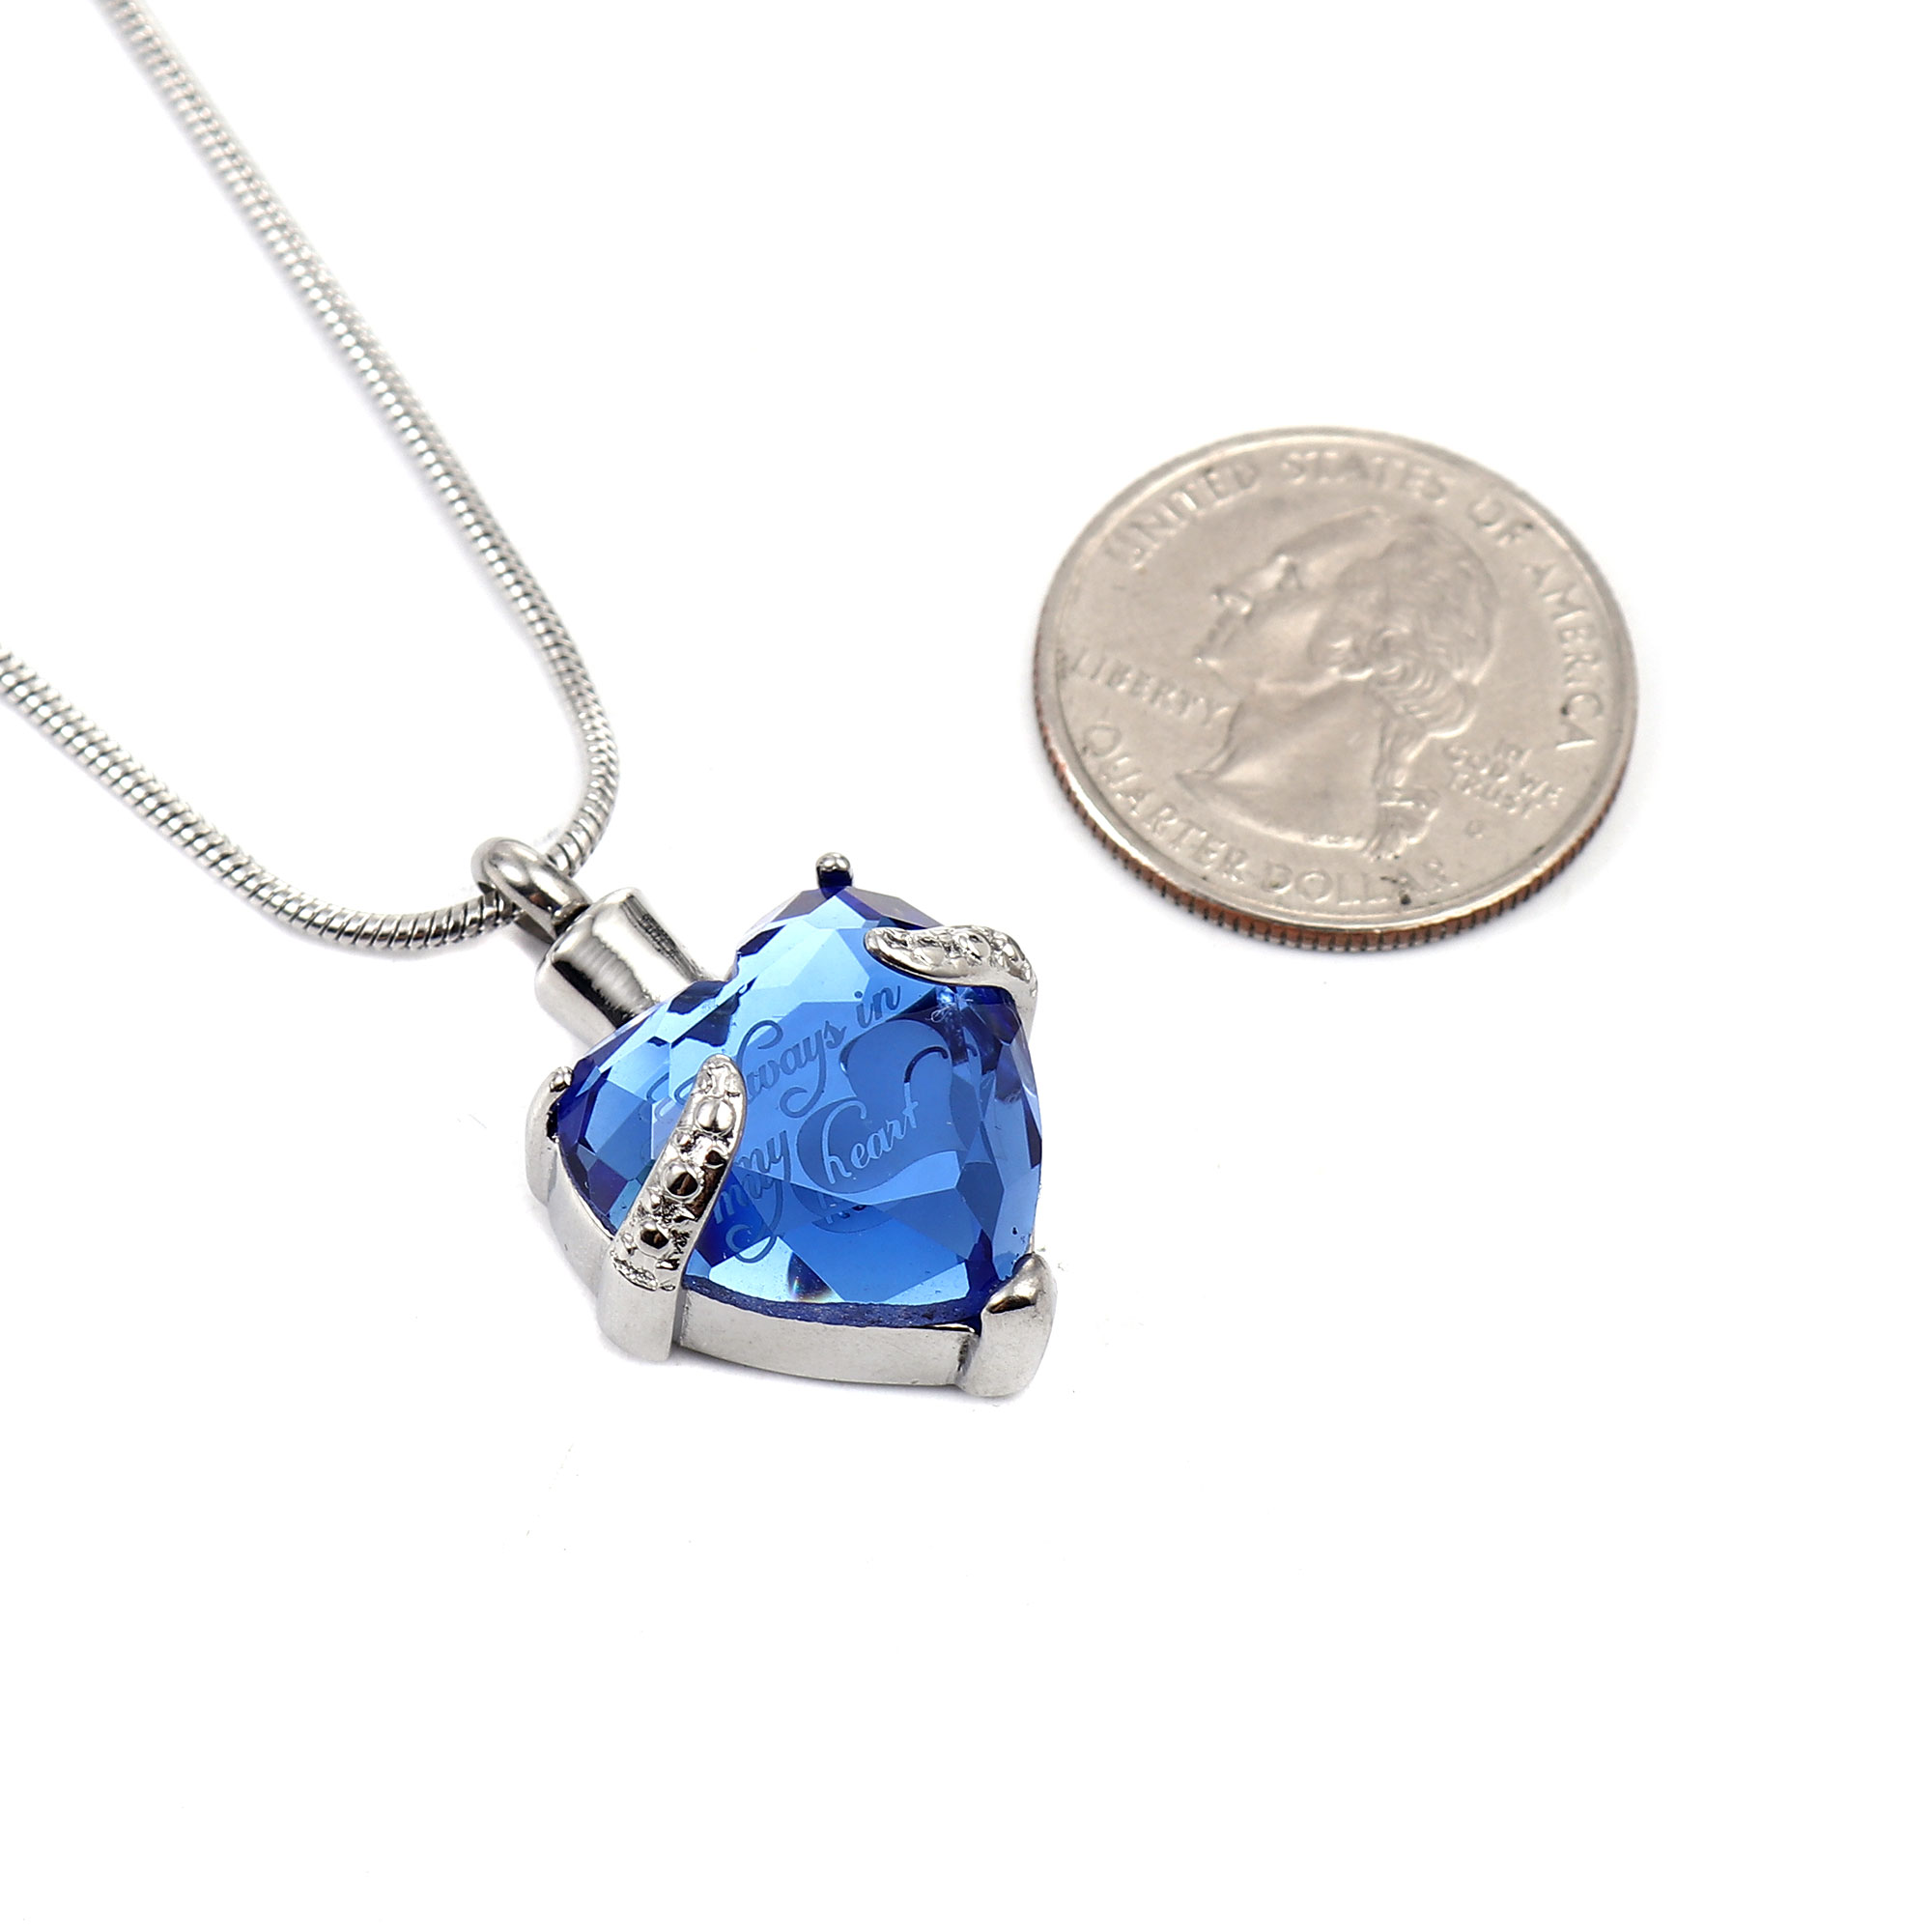 Blue "Always in My Heart" Cremation Necklace Rhinsestone Women's Heart Urn Necklace for Ashes Funeral Urn Jewelry Remembrance Memorial Pendant with Free Funnel Fill Kit and Gift Box - image 4 of 10